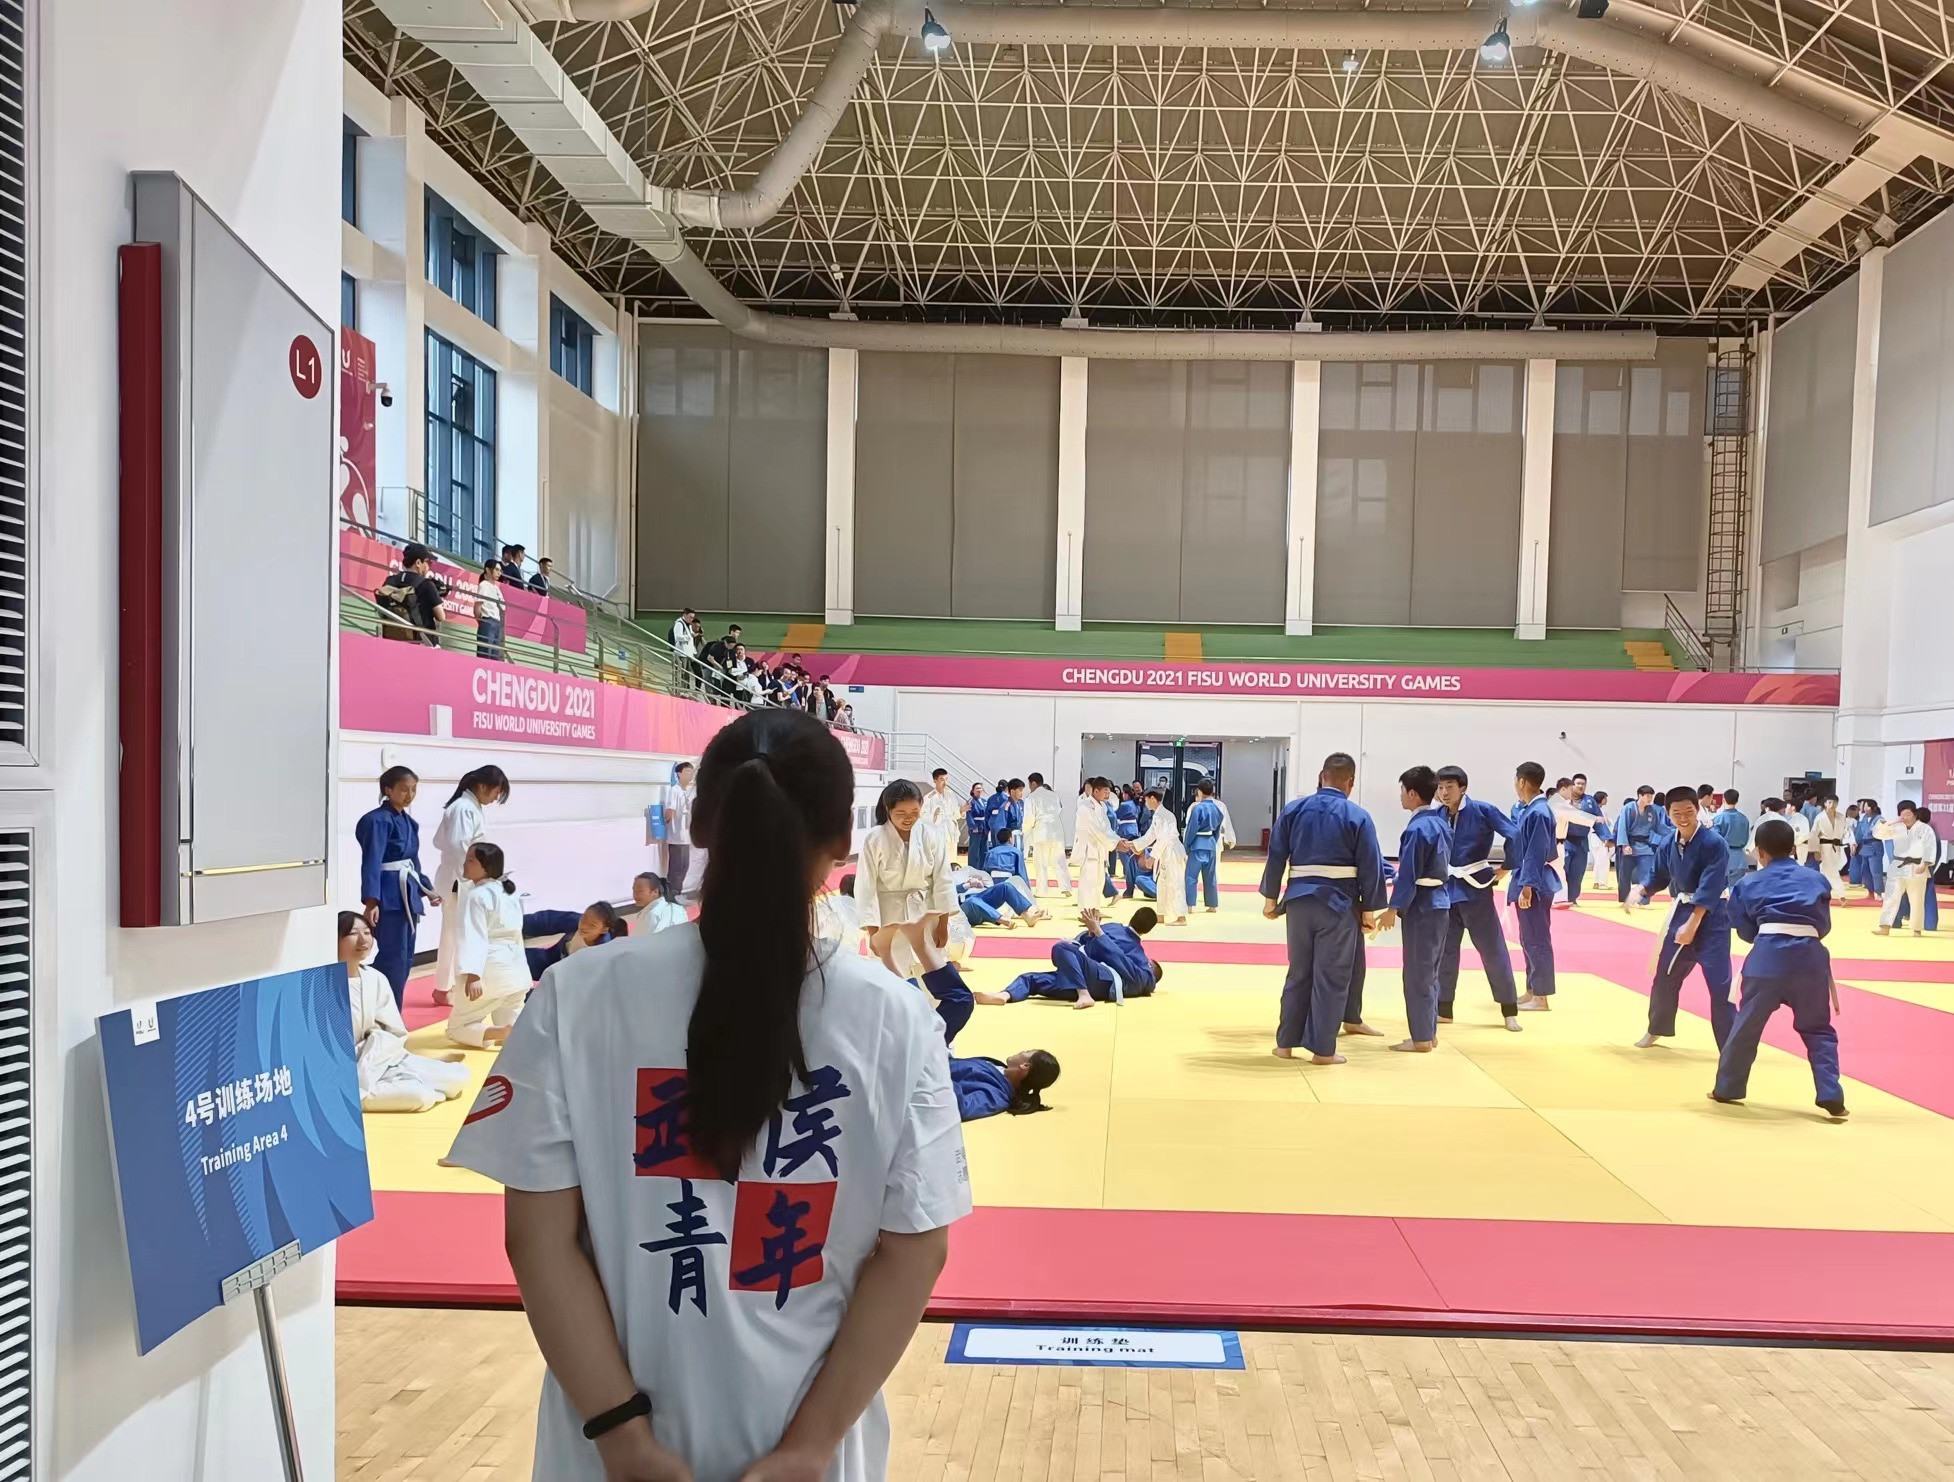 Chengdu 2021 volunteers get first taste of action at test events